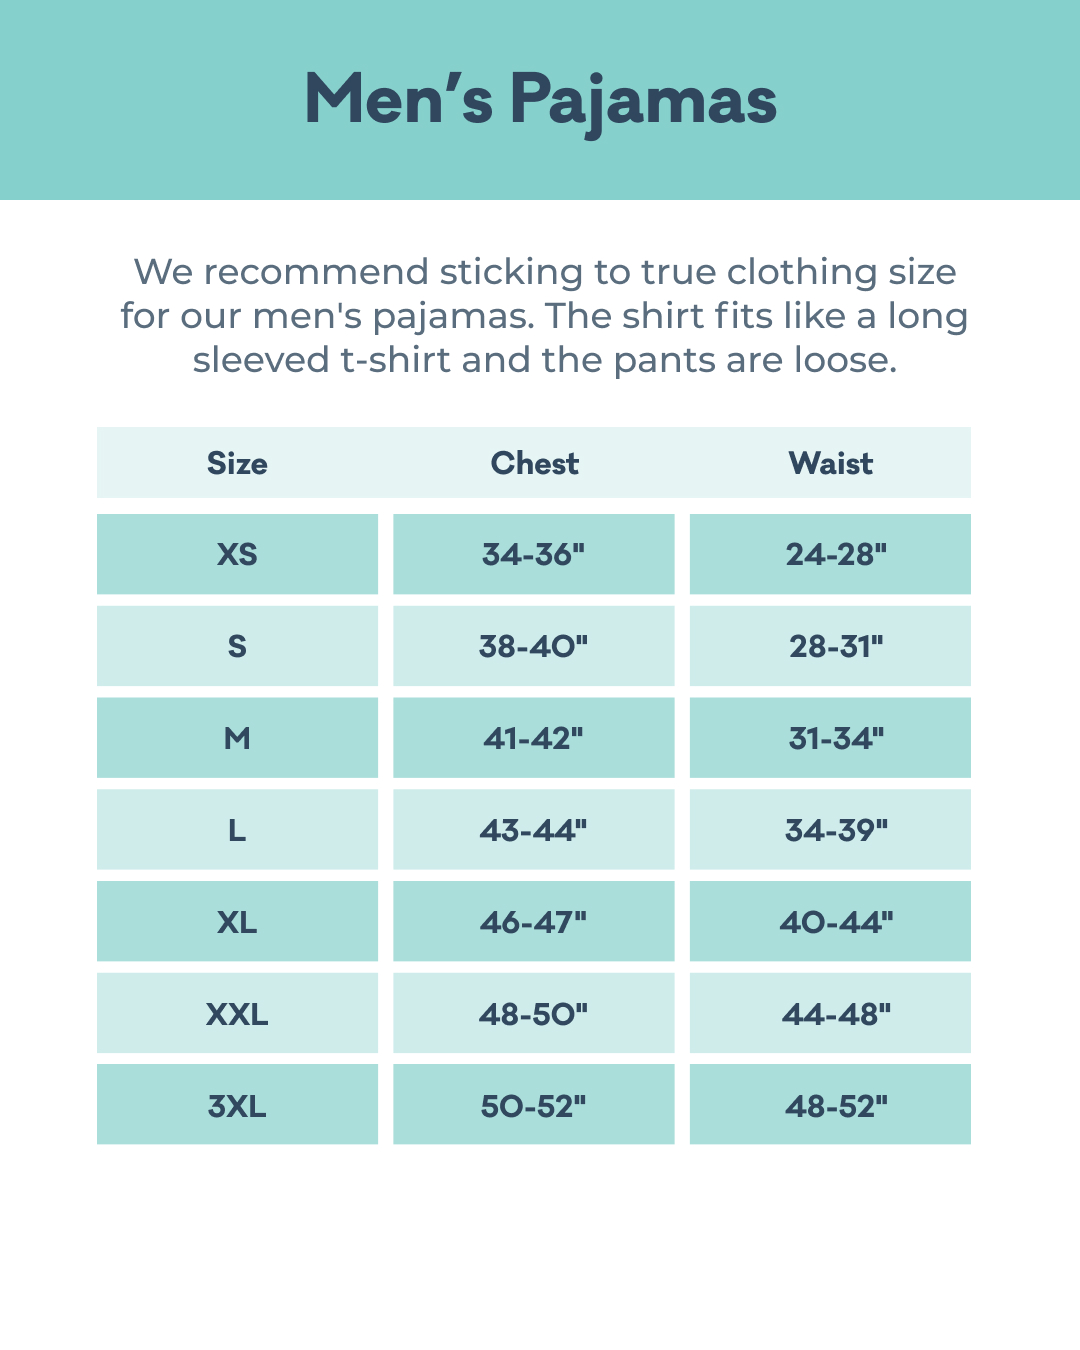 Men's Pajama Size Chart: size xs waist 24-28in and 34-36in chest; size s 28-32in waist and 38-40in chest; size m 31-34in waist and 41-42in chest; size L 34-39in waist and 43-44in chest; size xl 40-44in waist and 46-47in chest; size xxl 44-48in waist and 48-50in chest; size 3xl 48-50in waist and 50-52in chest